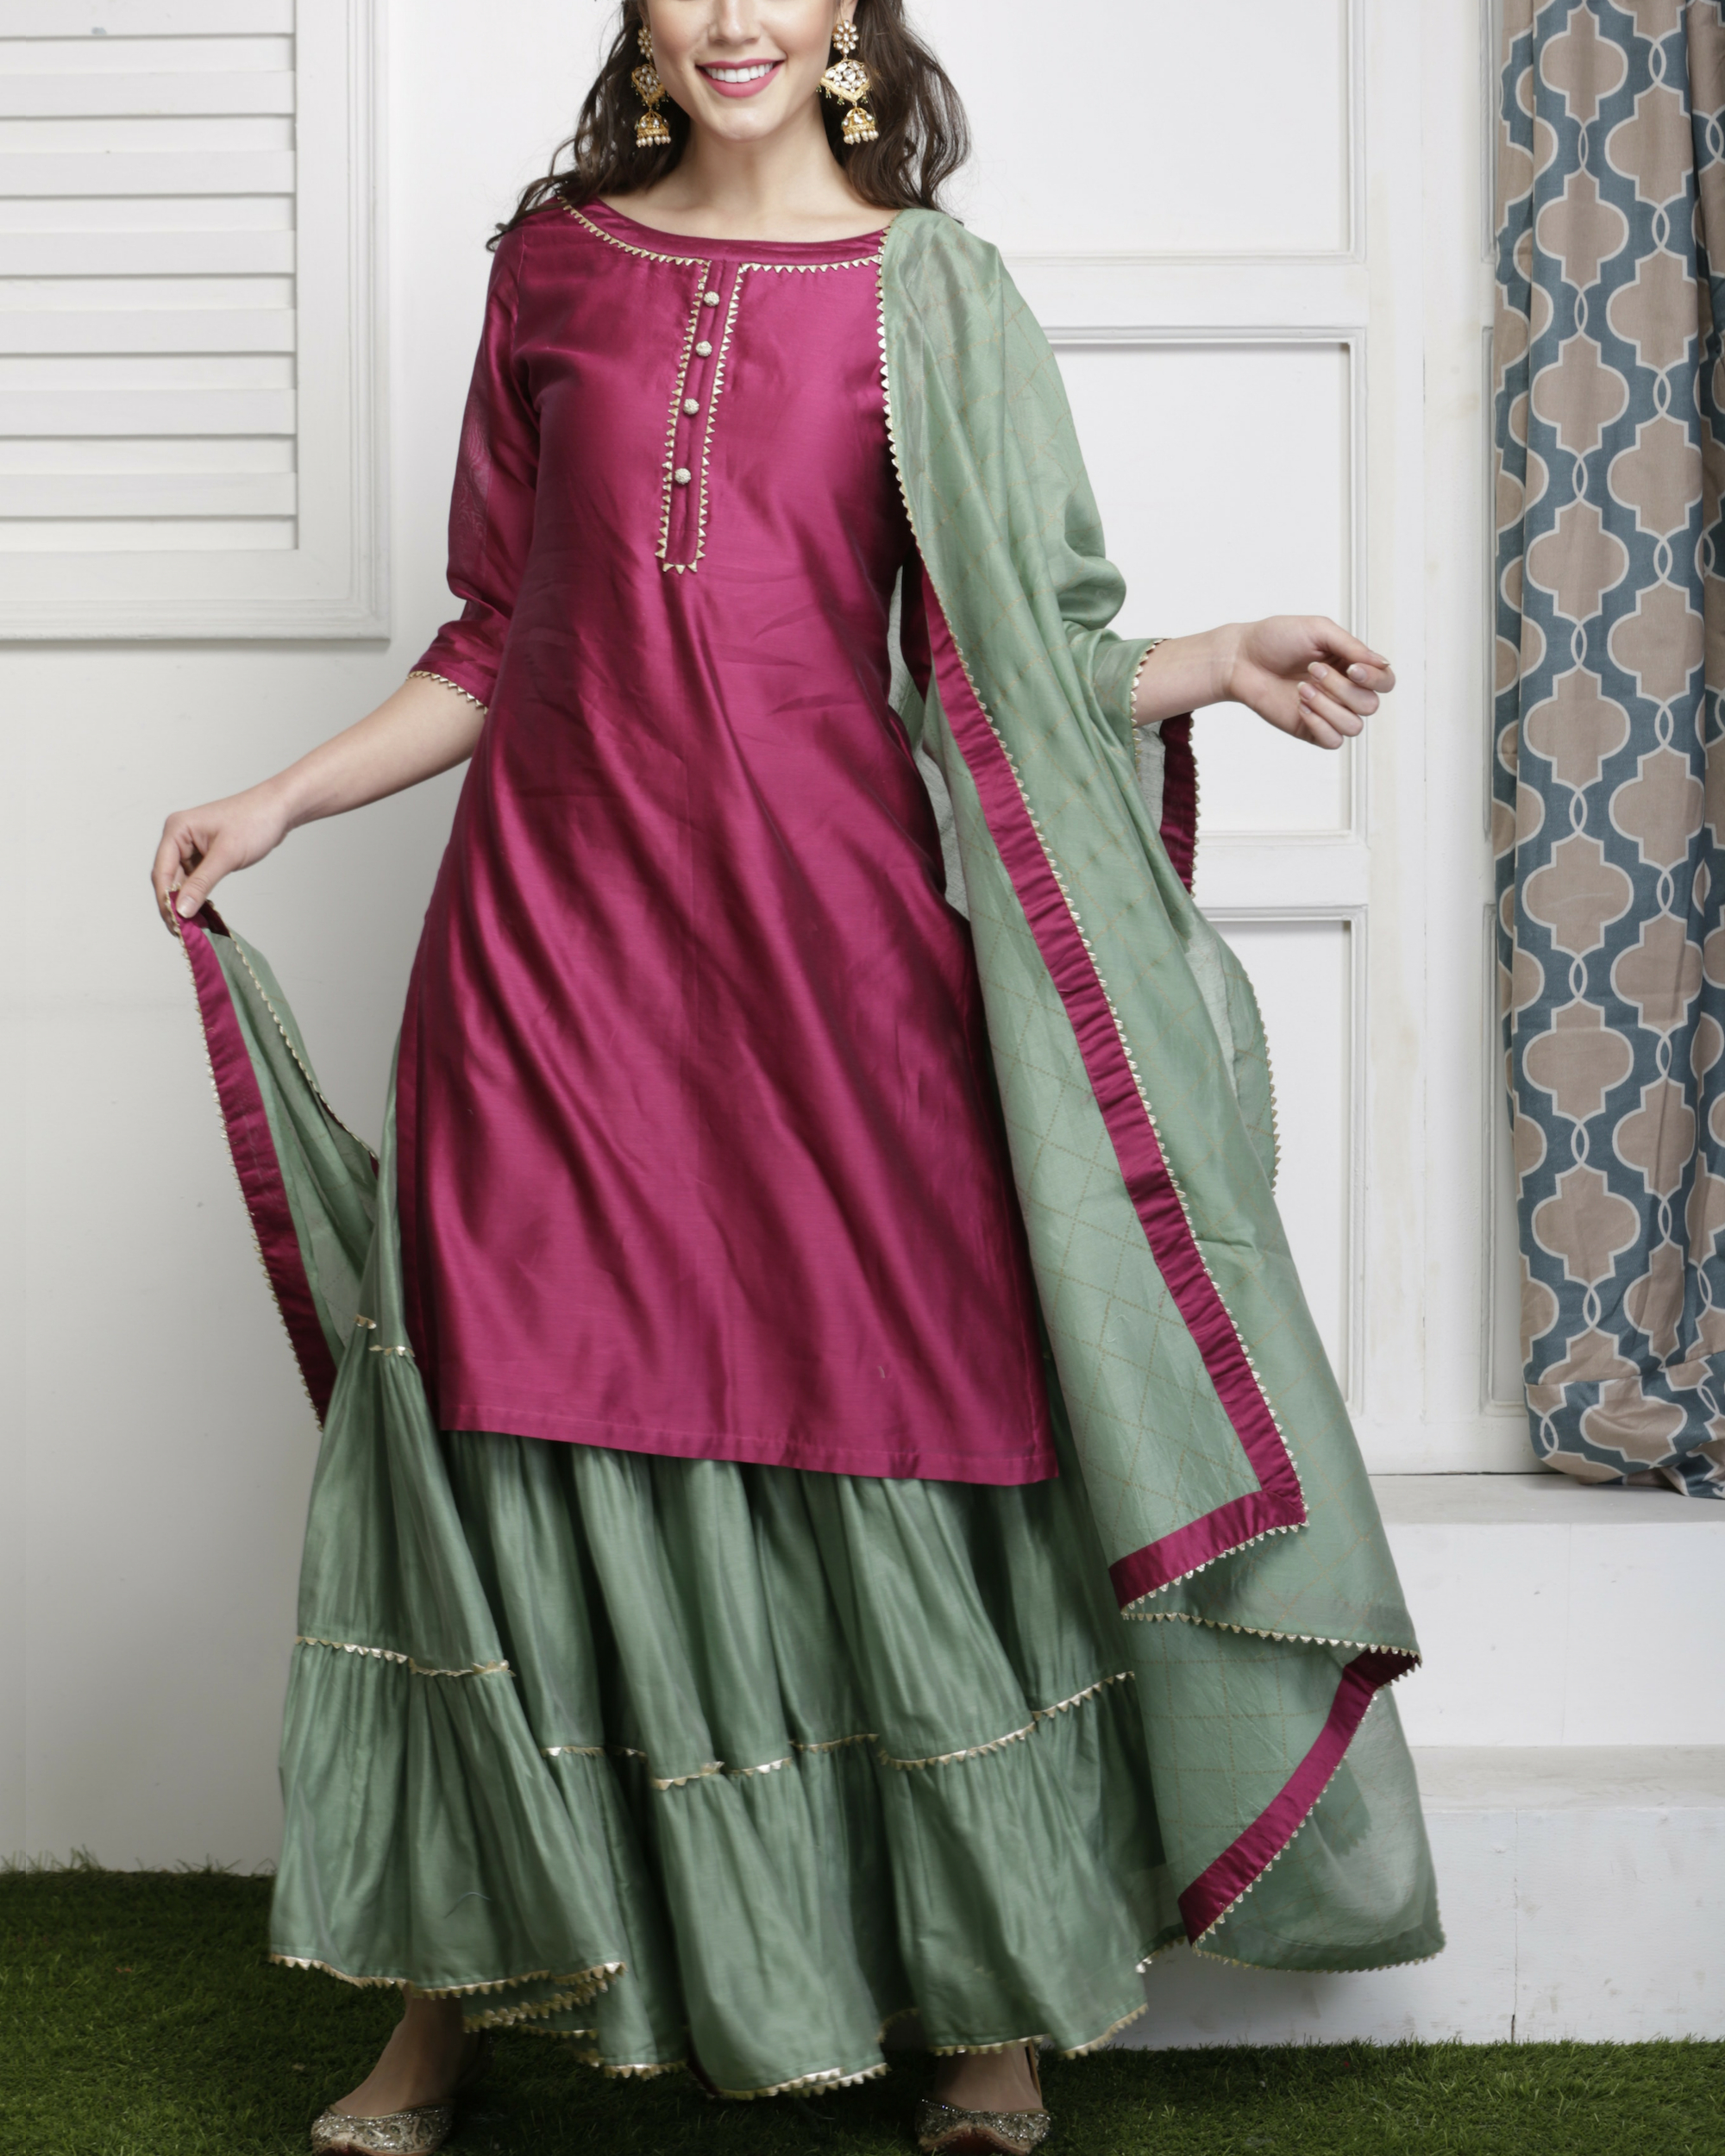 Buy Teal Green Block Printed Chanderi Kurta with Cotton Crushed Skirt and  Red Dupatta  Set of 3 online at T  Fashion Designer dresses indian  Dress indian style